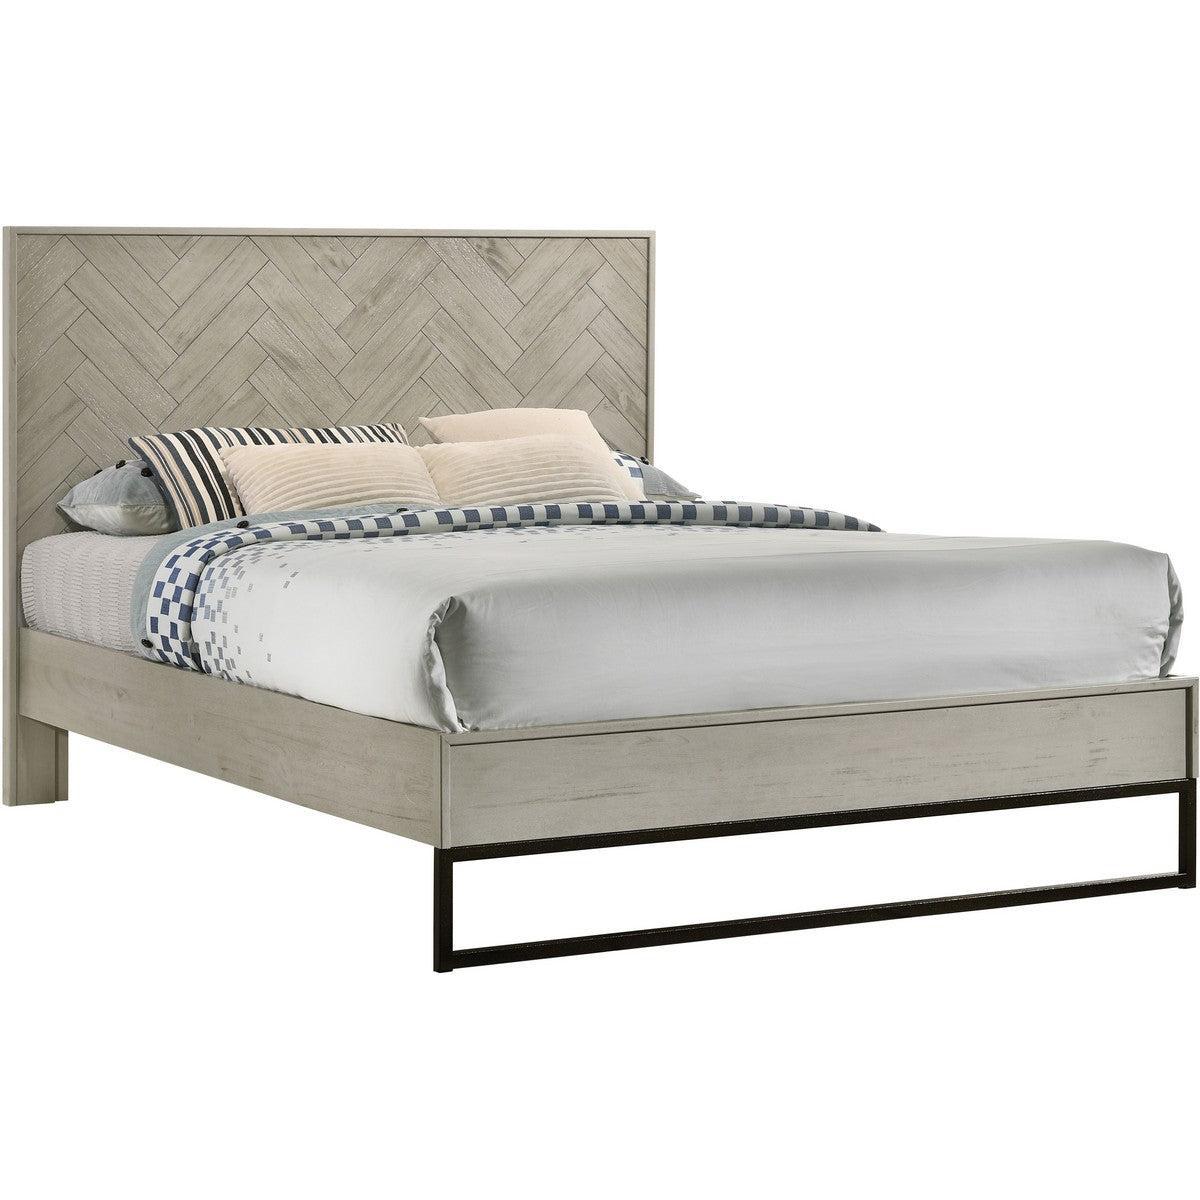 Meridian Furniture Weston Grey Stone Queen Bed (3 Boxes)Meridian Furniture - Queen Bed (3 Boxes) - Minimal And Modern - 1